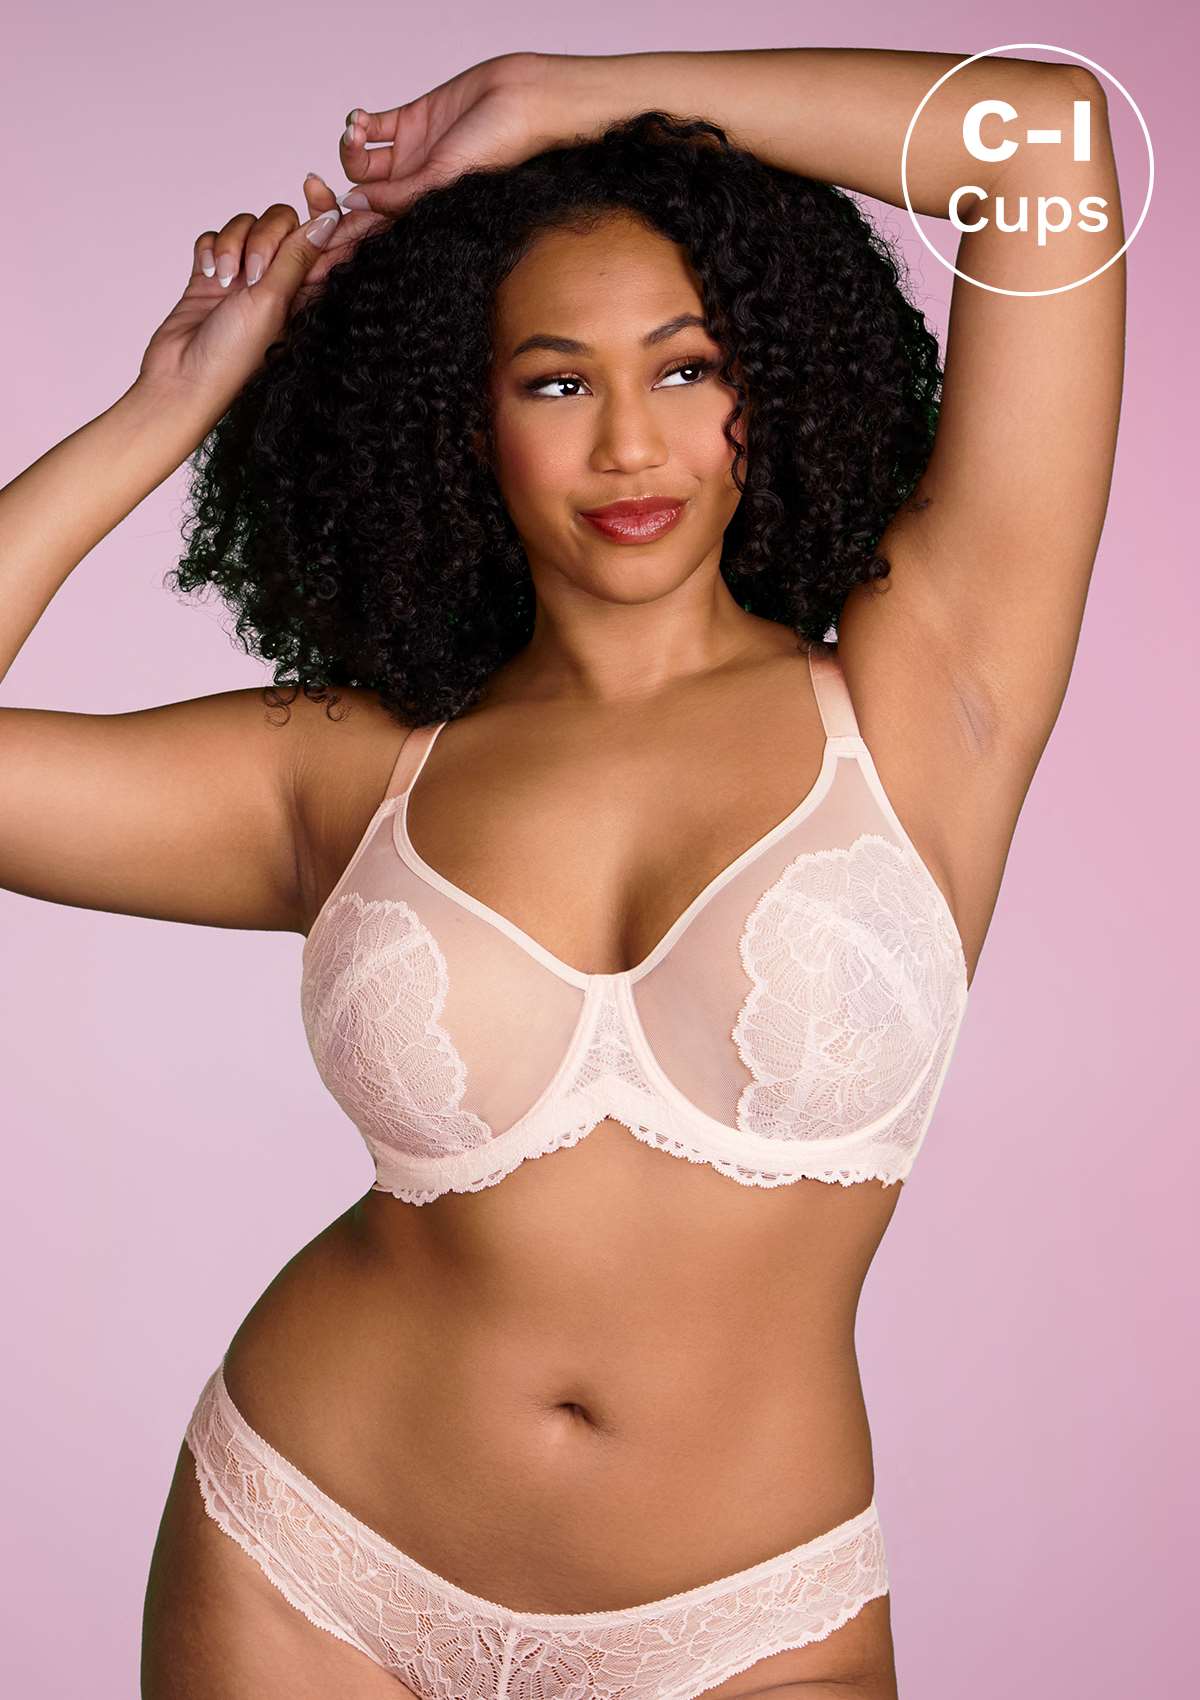 HSIA Blossom Sheer Lace Bra: Comfortable Underwire Bra For Big Busts - Dusty Peach / 34 / D